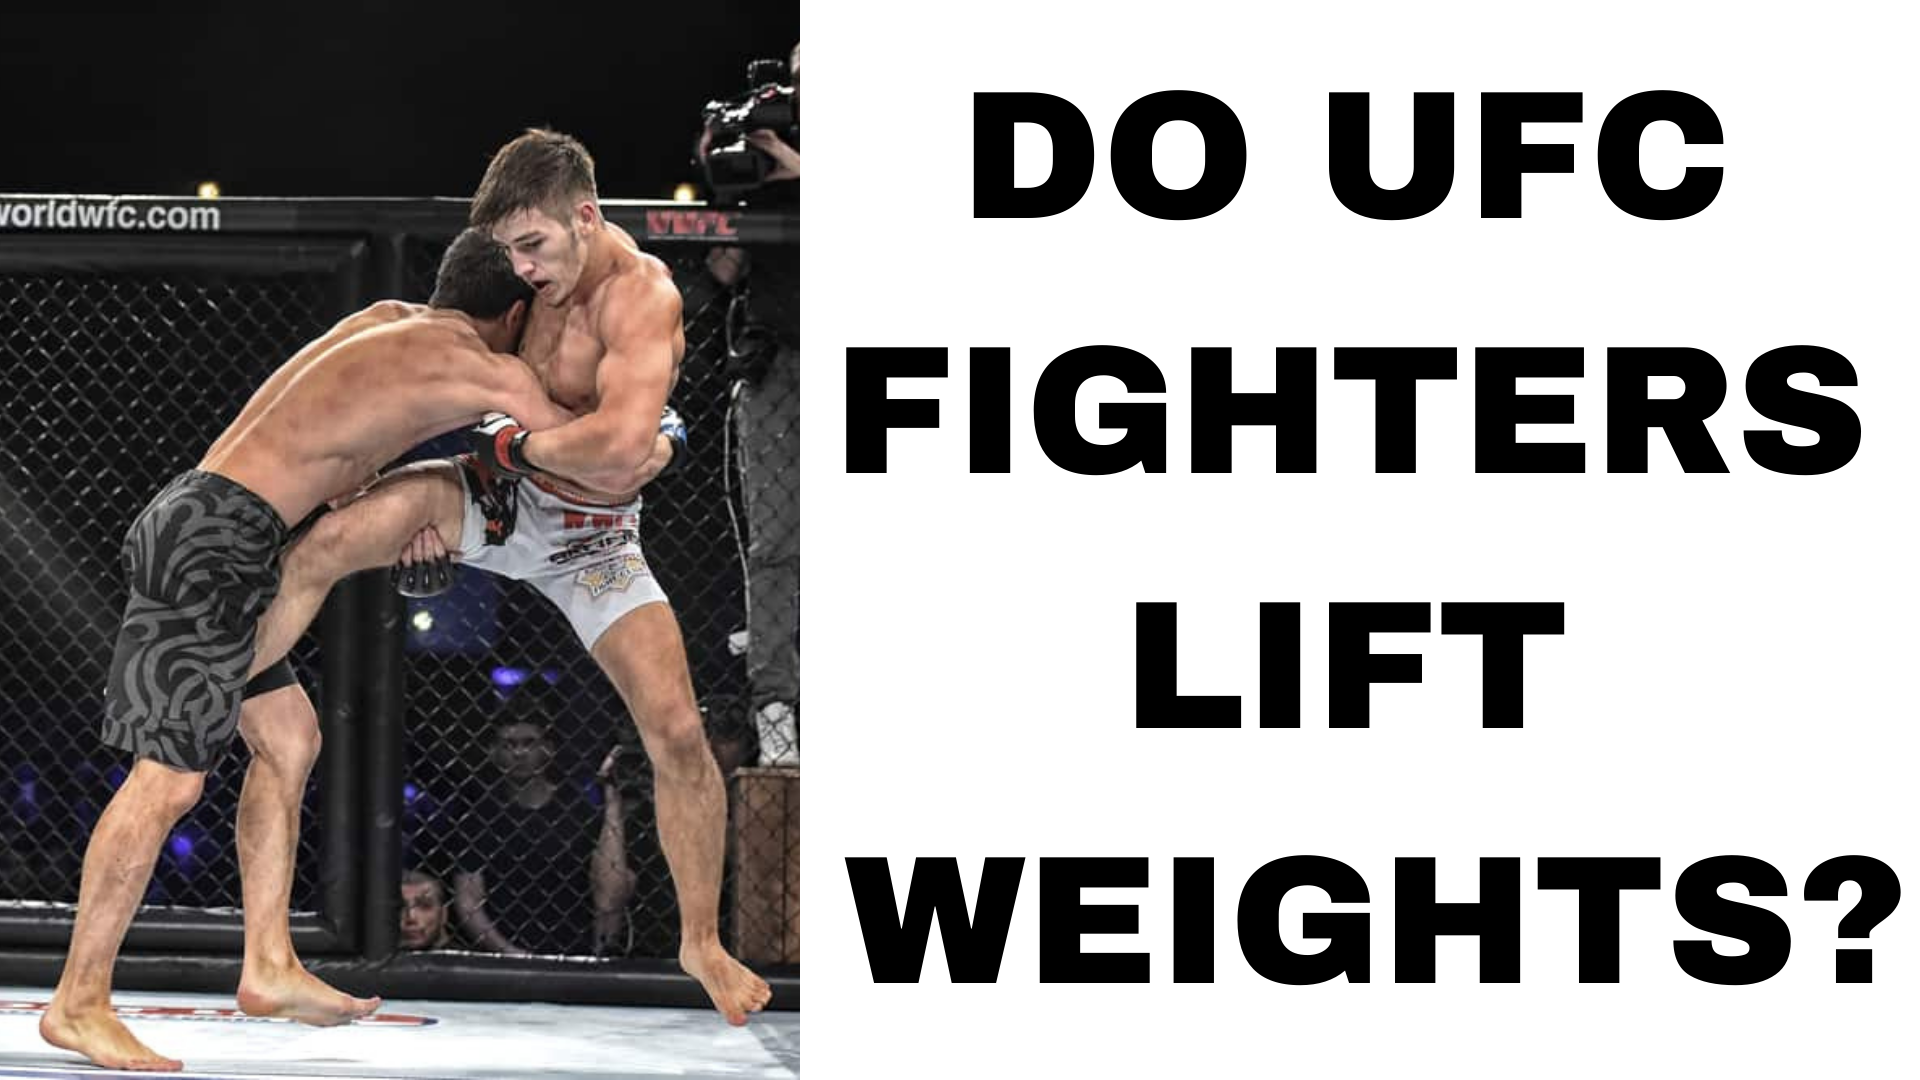 Do UFC Fighters Lift Weights?